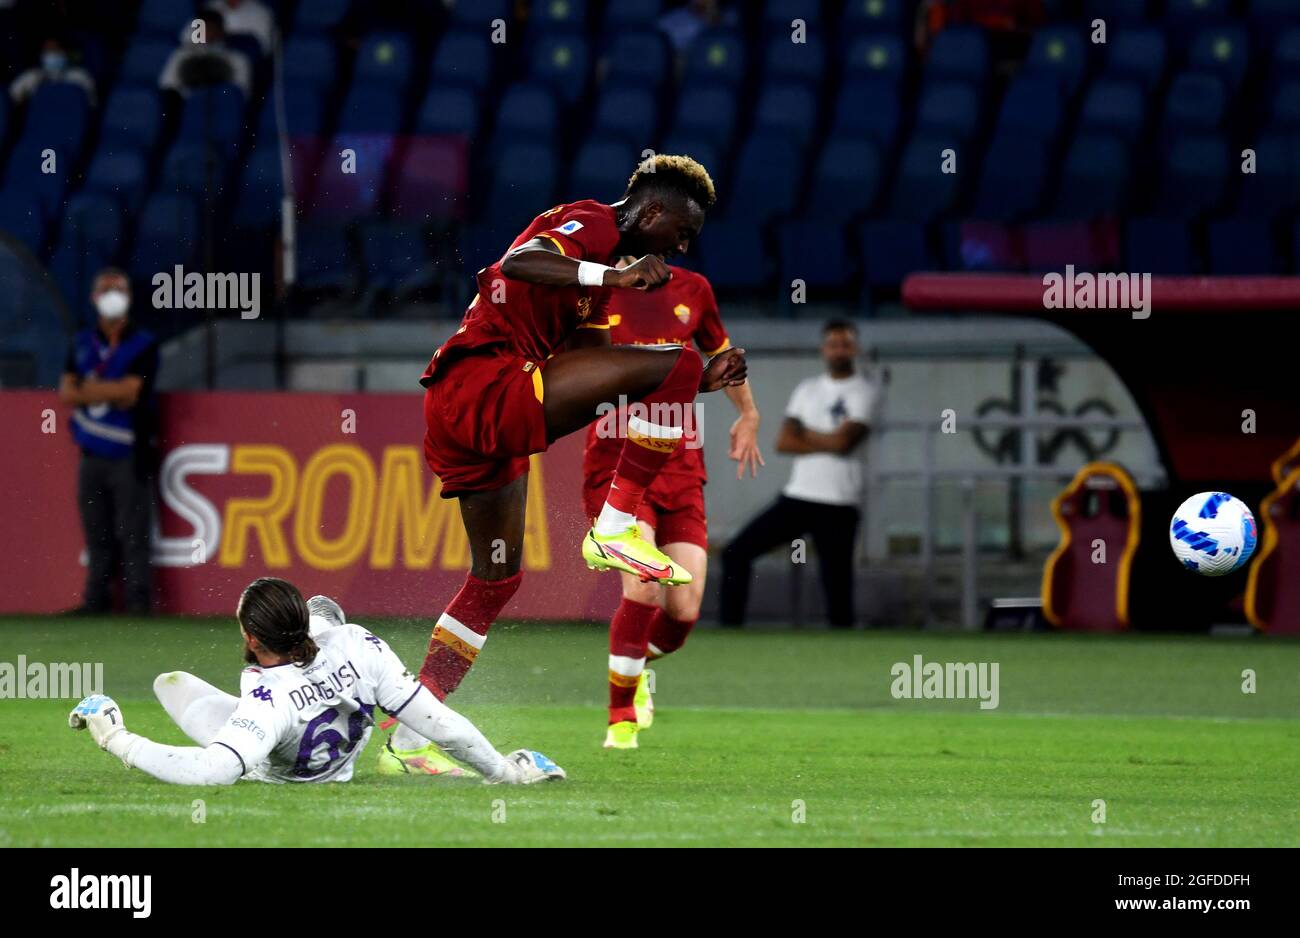 ROME, ITALY - AUGUST 22: Bartlomiej Dragowski of ACF Fiorentina commits a foul on Tammy Abraham of AS Roma and is sent off by the referee ,during the Serie A match between AS Roma v ACF Fiorentina at Stadio Olimpico on August 22, 2021 in Rome, Italy. (MB Media) Stock Photo